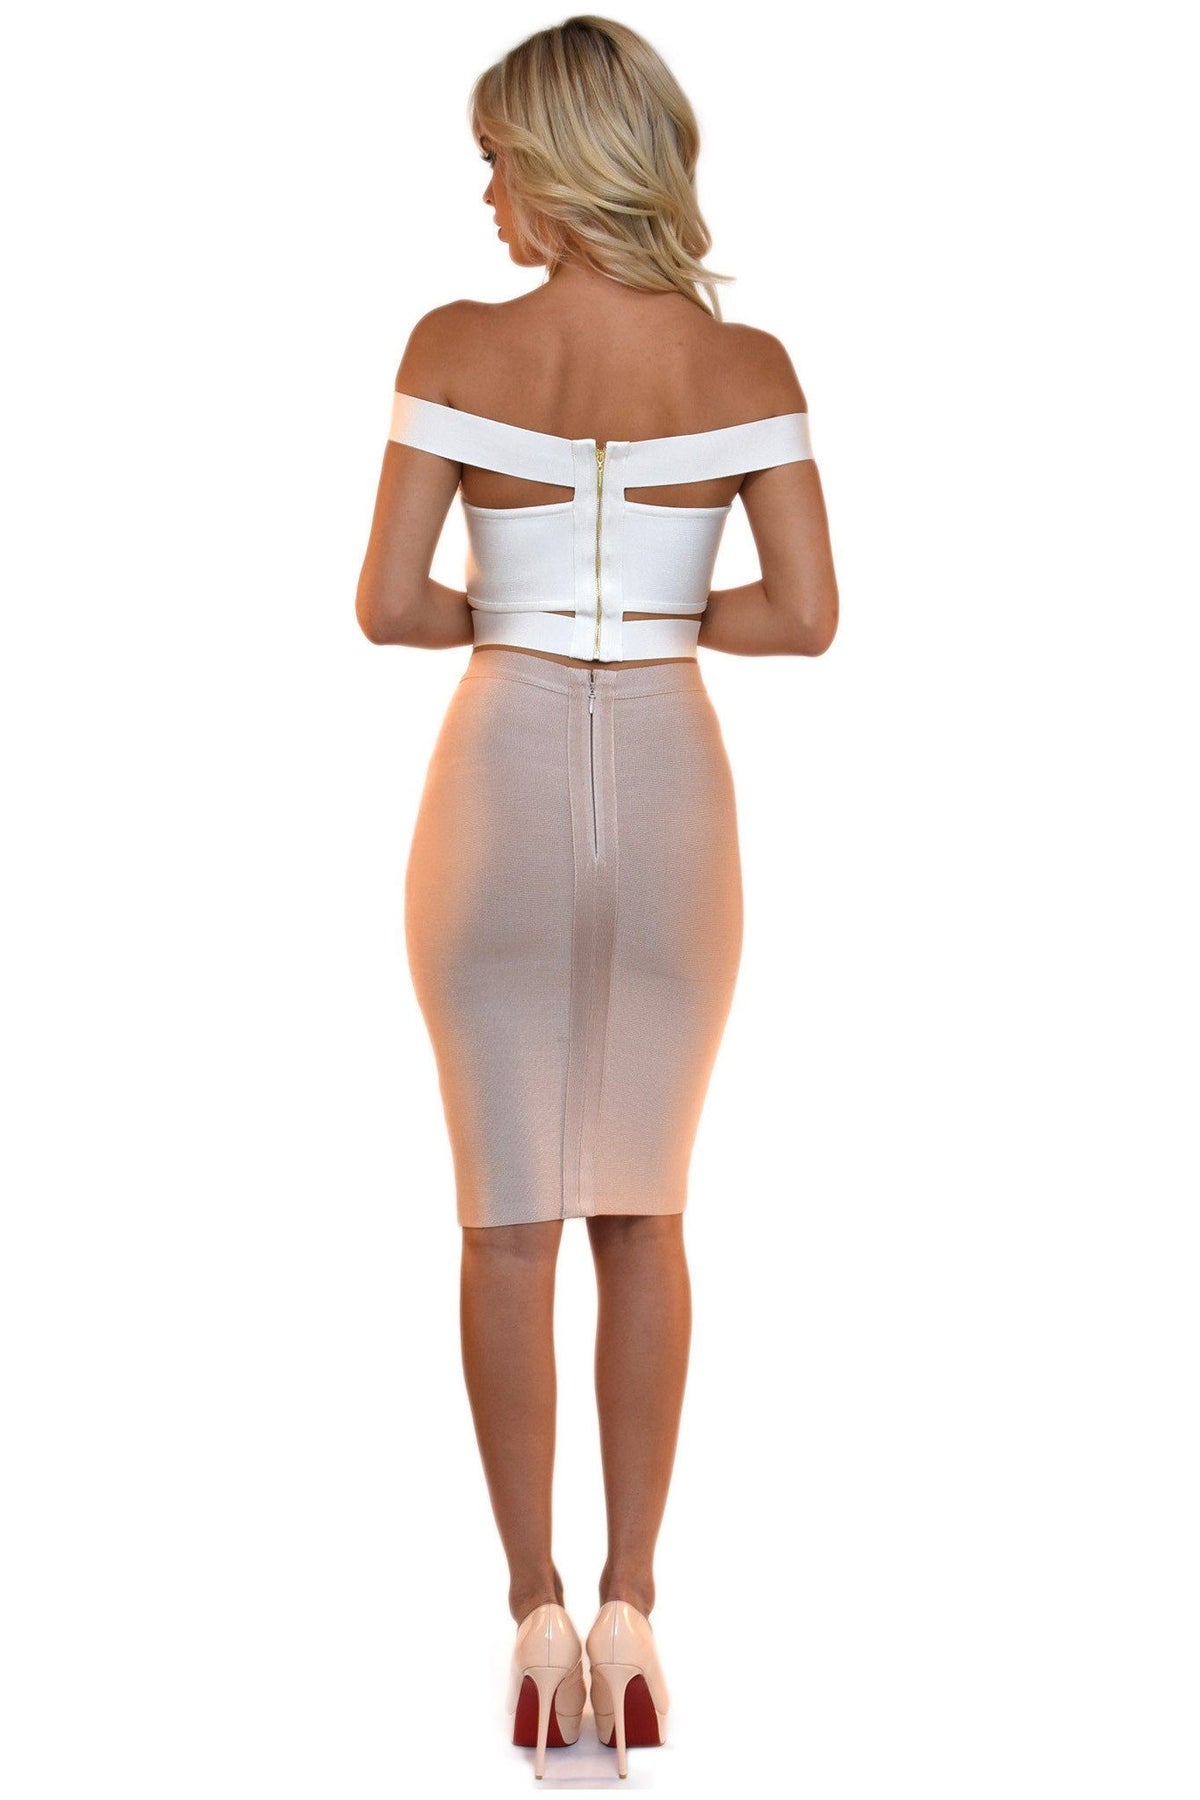 Back of white bandage top featuring off-shoulder panel design and stylish cutouts